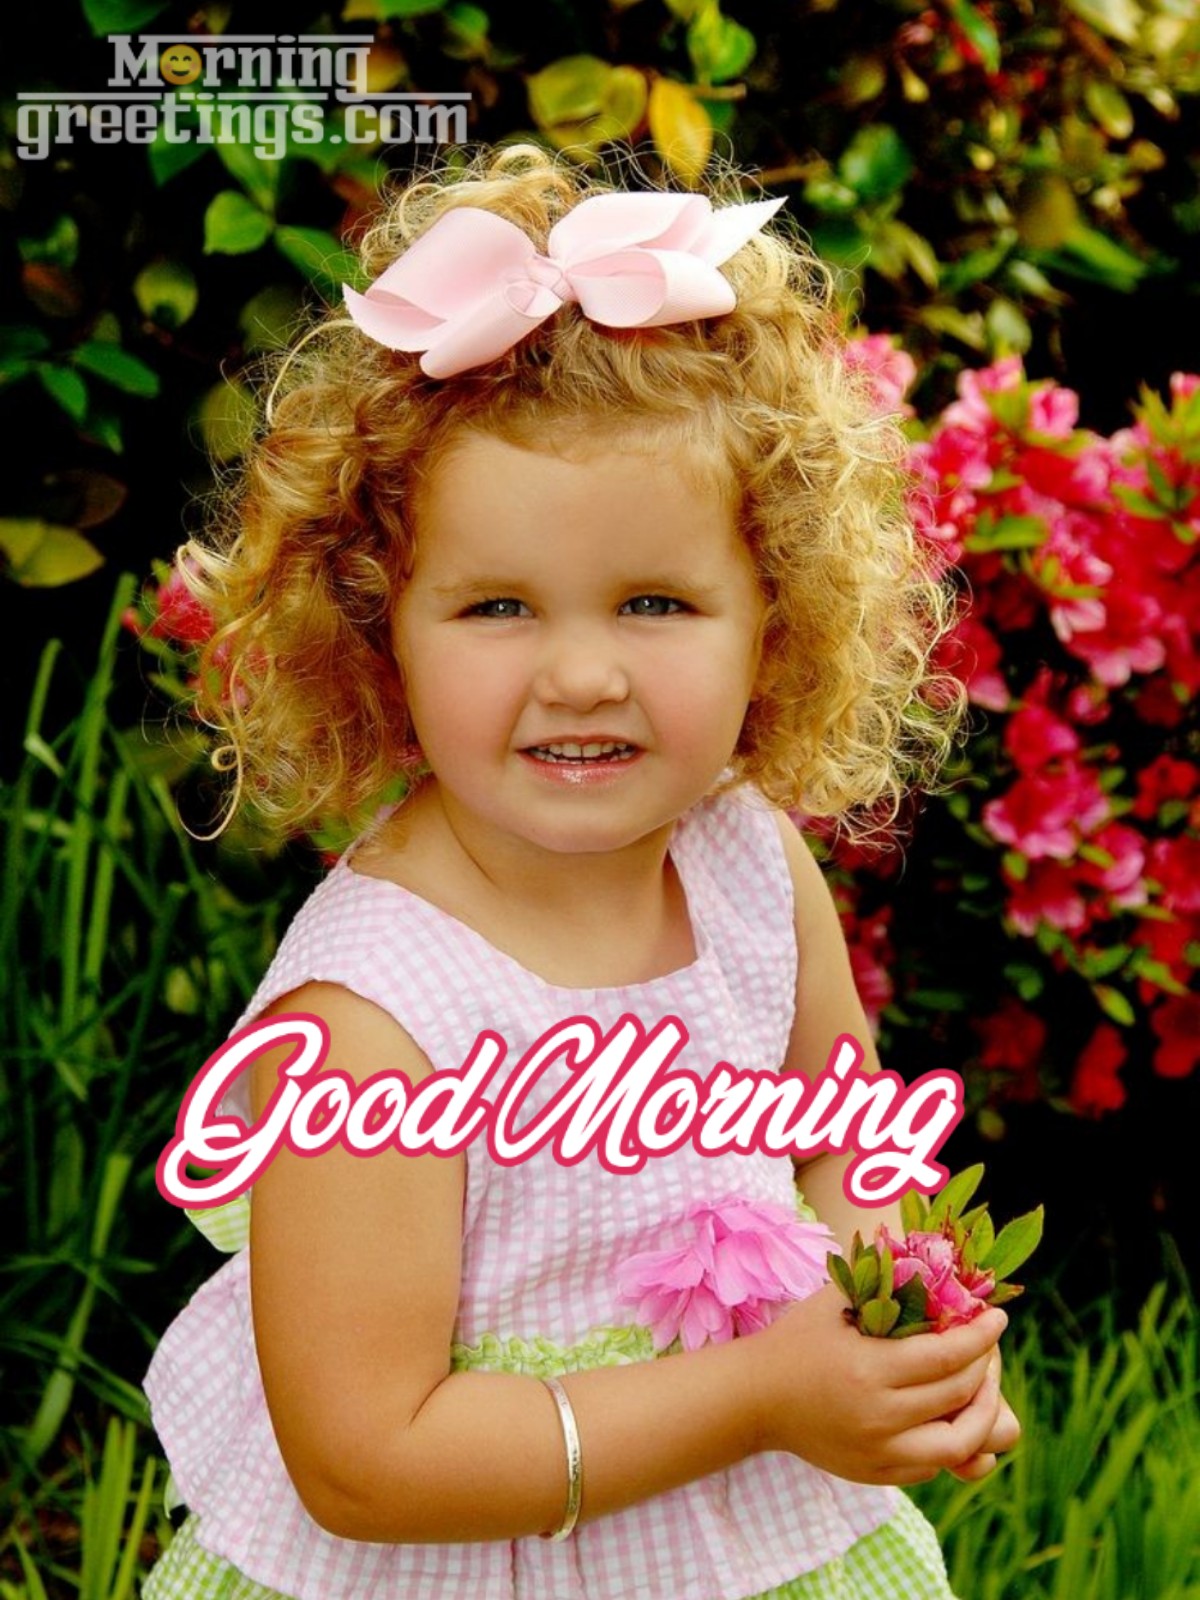 Good Morning Wishes With Beautiful Women Images - Morning Greetings ...